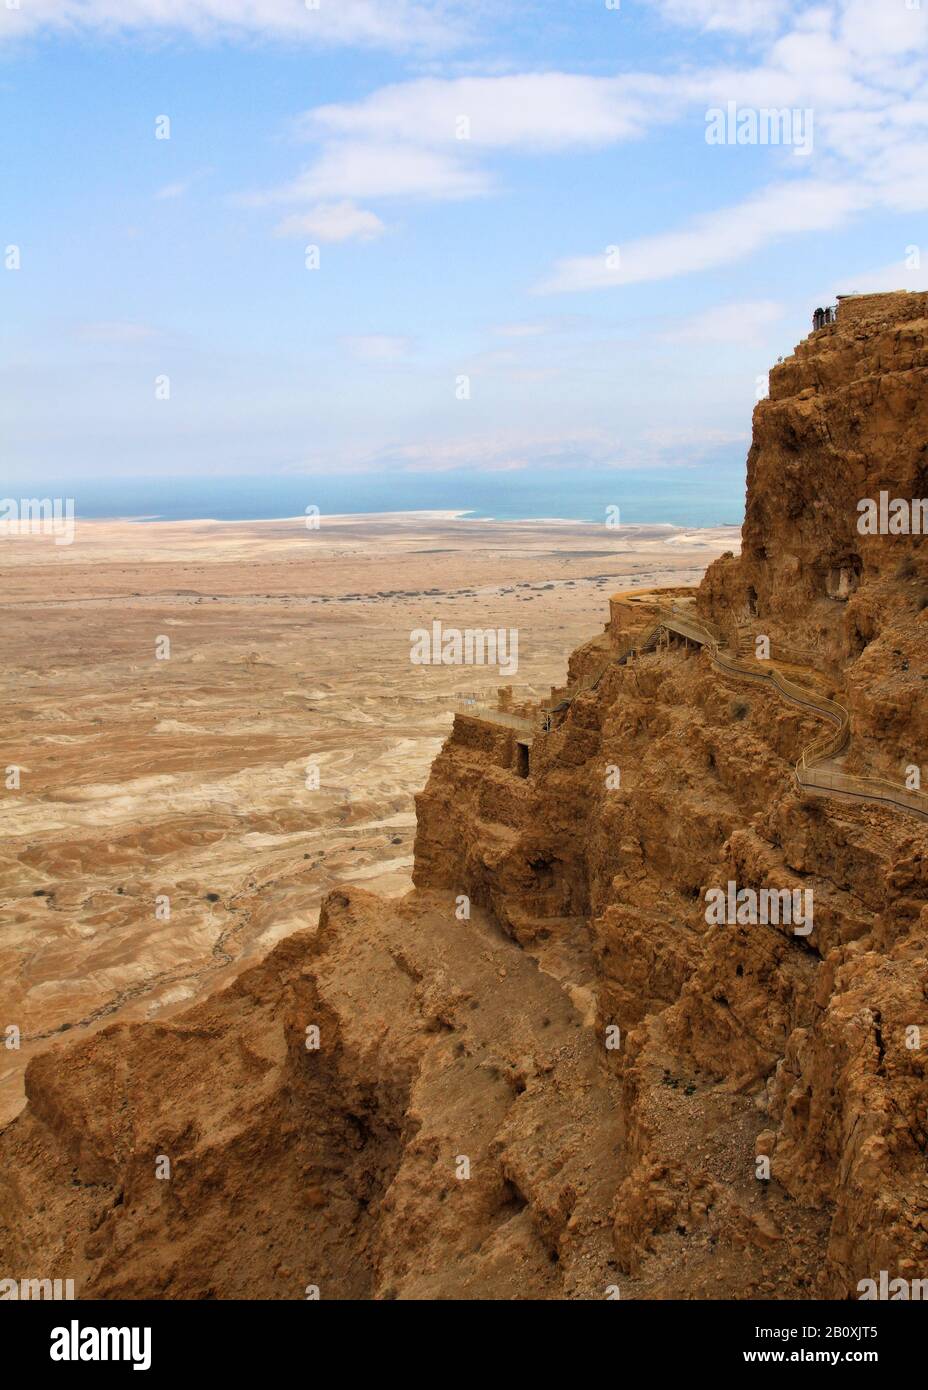 A view of the cliffs and plateau of Masada with the backdrop of the Dead Sea in Israel. Stock Photo